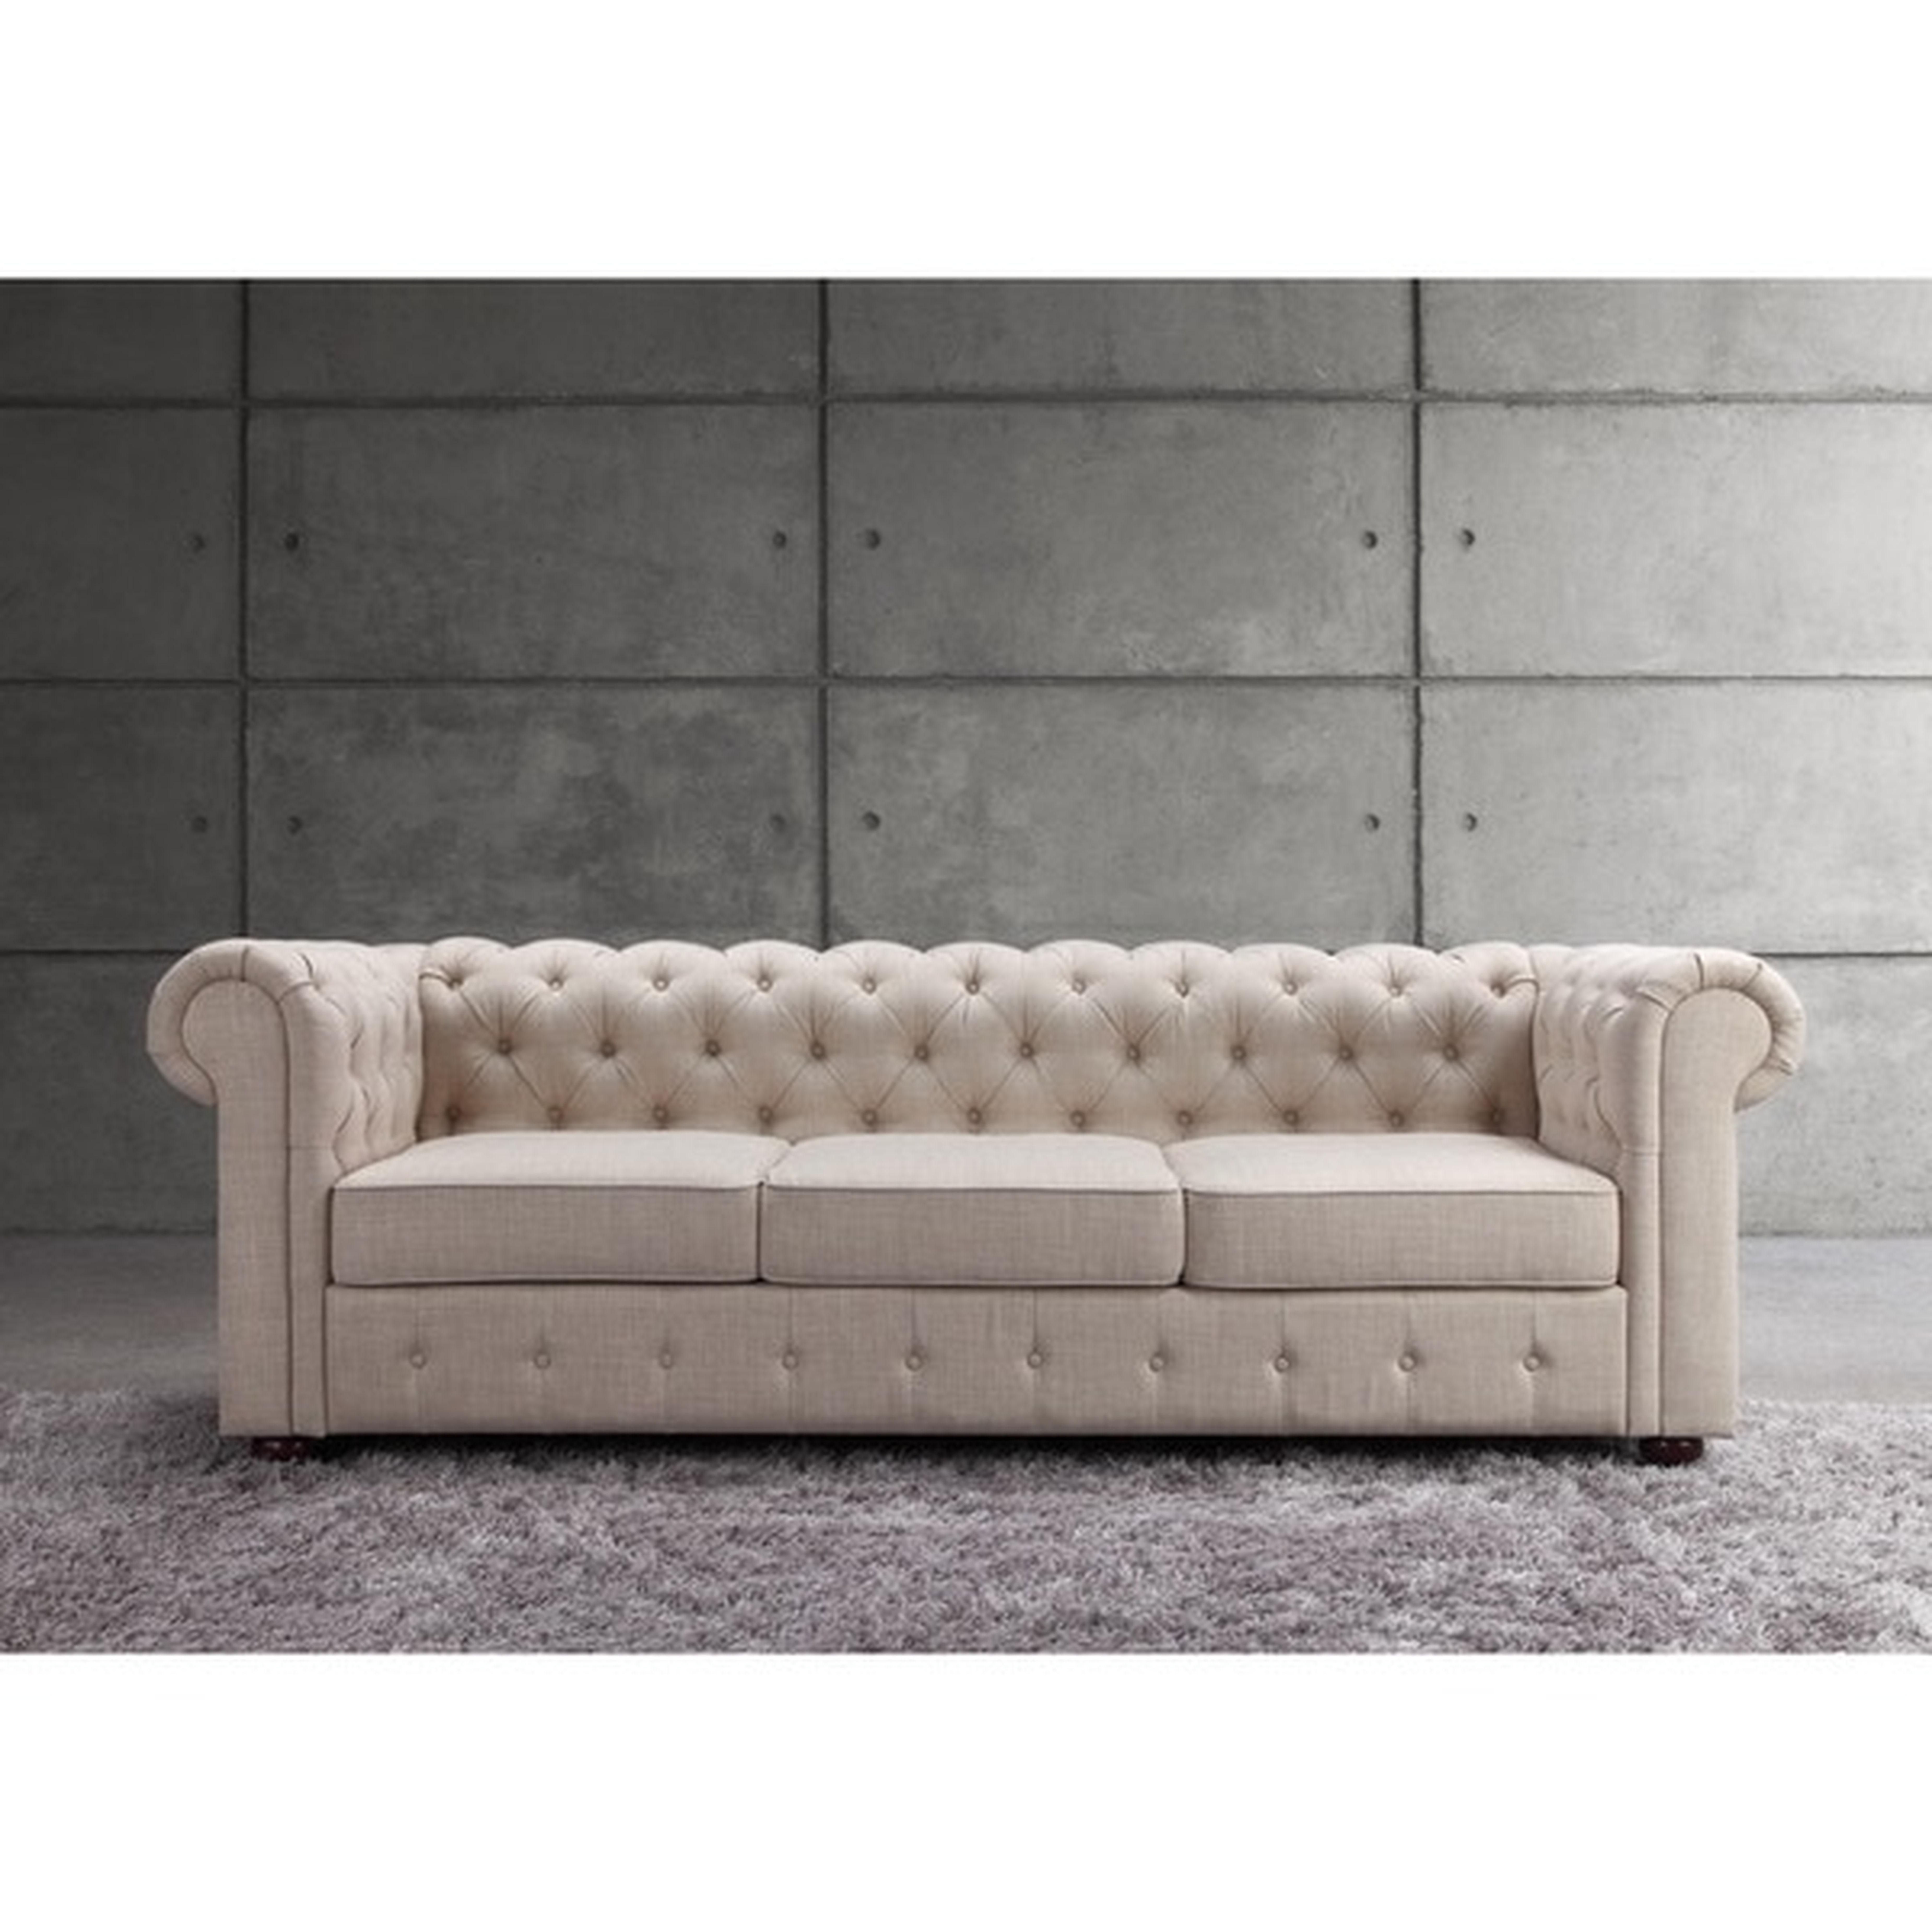 Moser Bay Furniture Garcia Beige Chesterfield Rolled Arm Sofa - Overstock